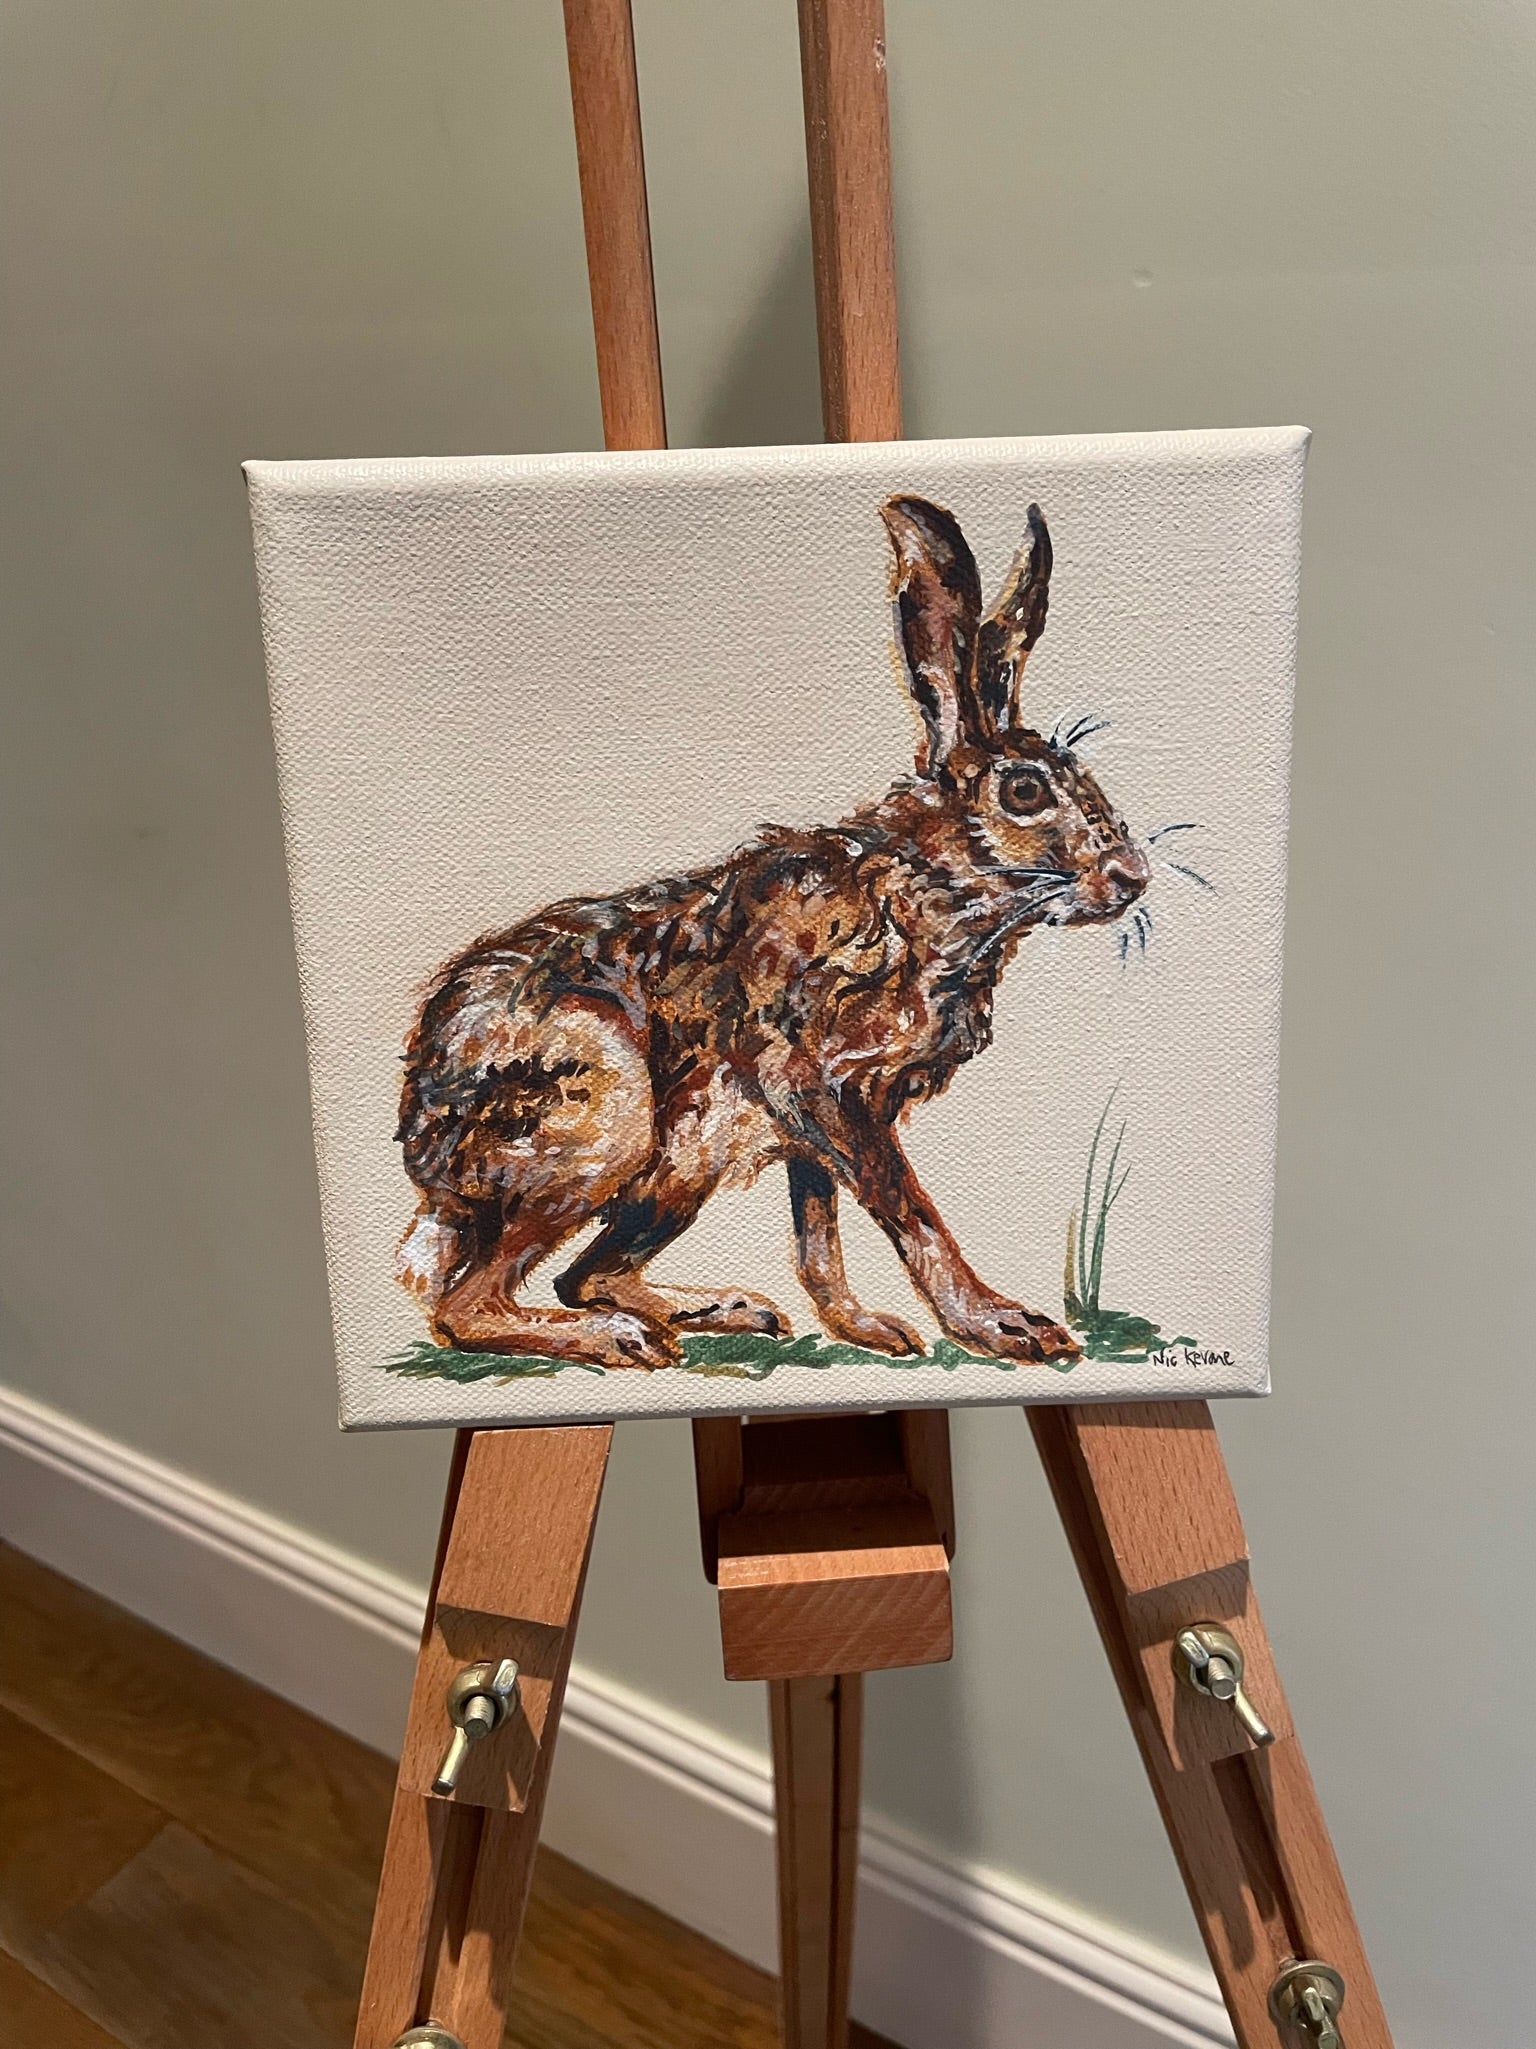 Hare - 15cm x 15cm mini paintings depicting various countryside subjects.